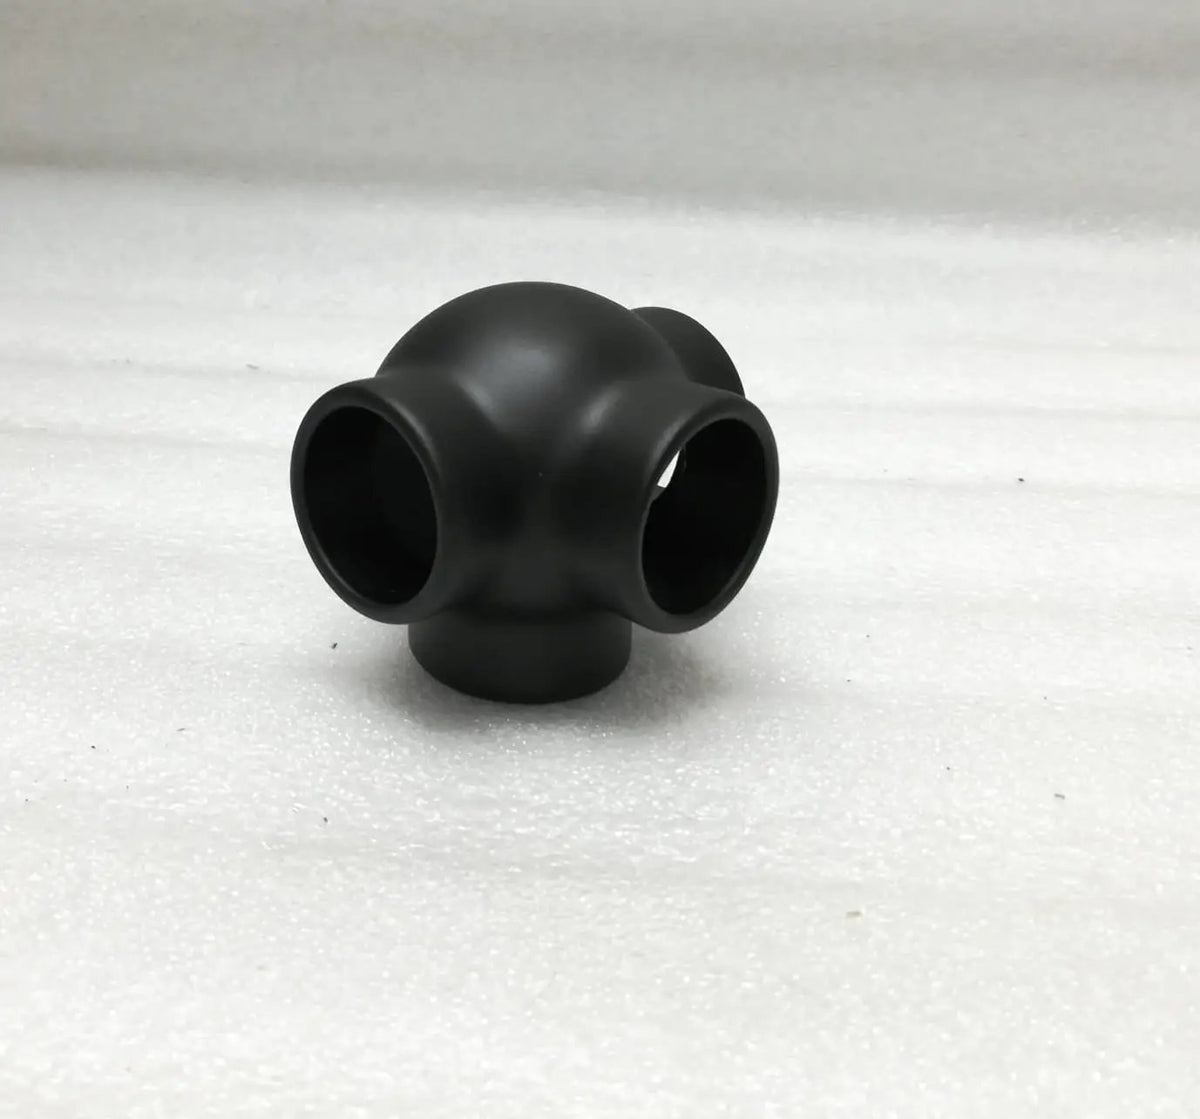 Ball Side Outlet Tee for 1" Tubing Ball Fittings, Components for 1" Od Tubing MatteBlackPowderCoatedFinish Trade Diversified